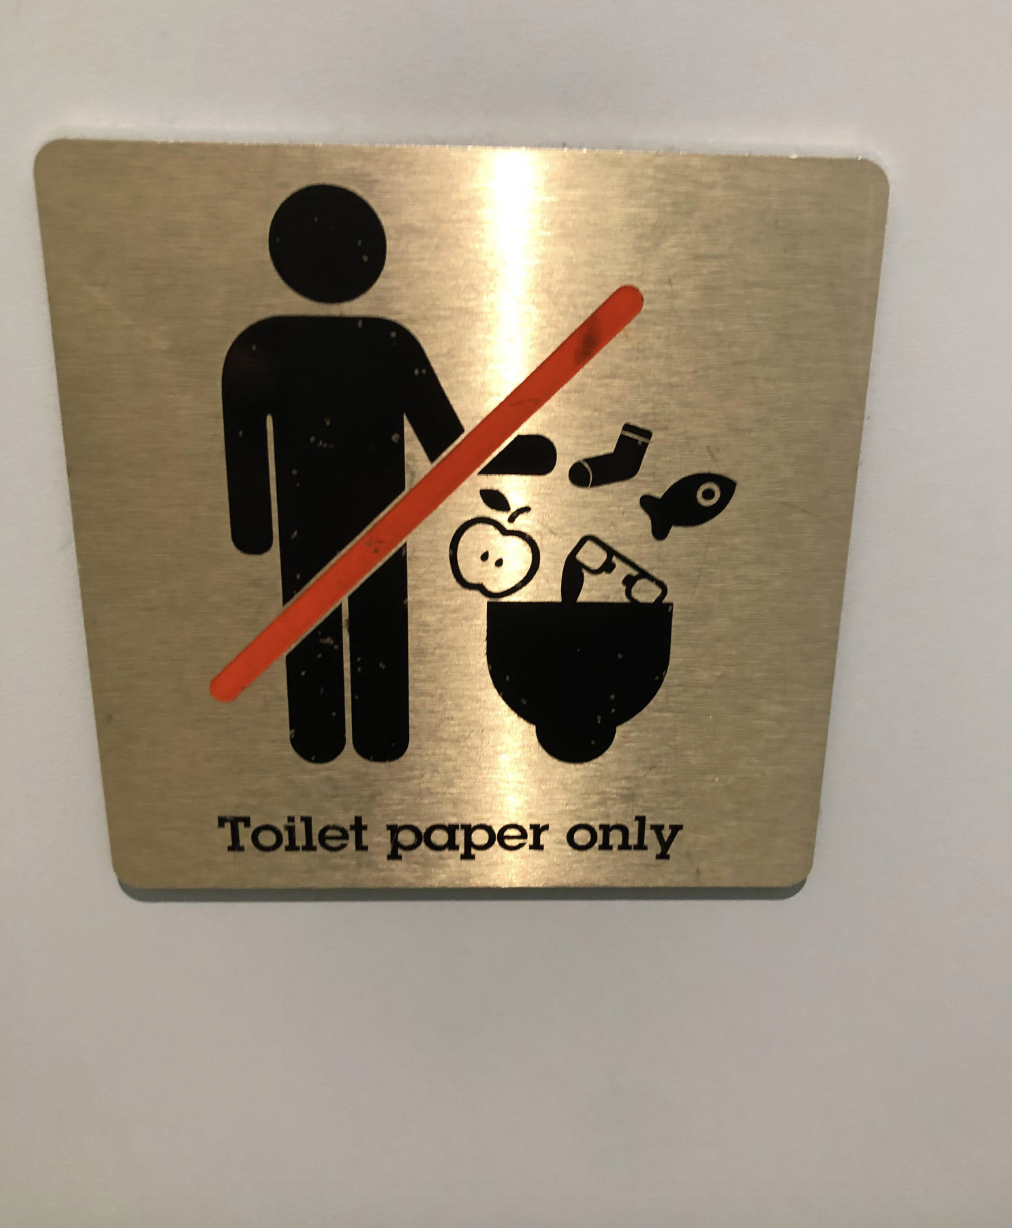 Sign says, Toilet paper only, with a slash across a picture of a man throwing out an apple, sock, a fish, and underwear into the toilet